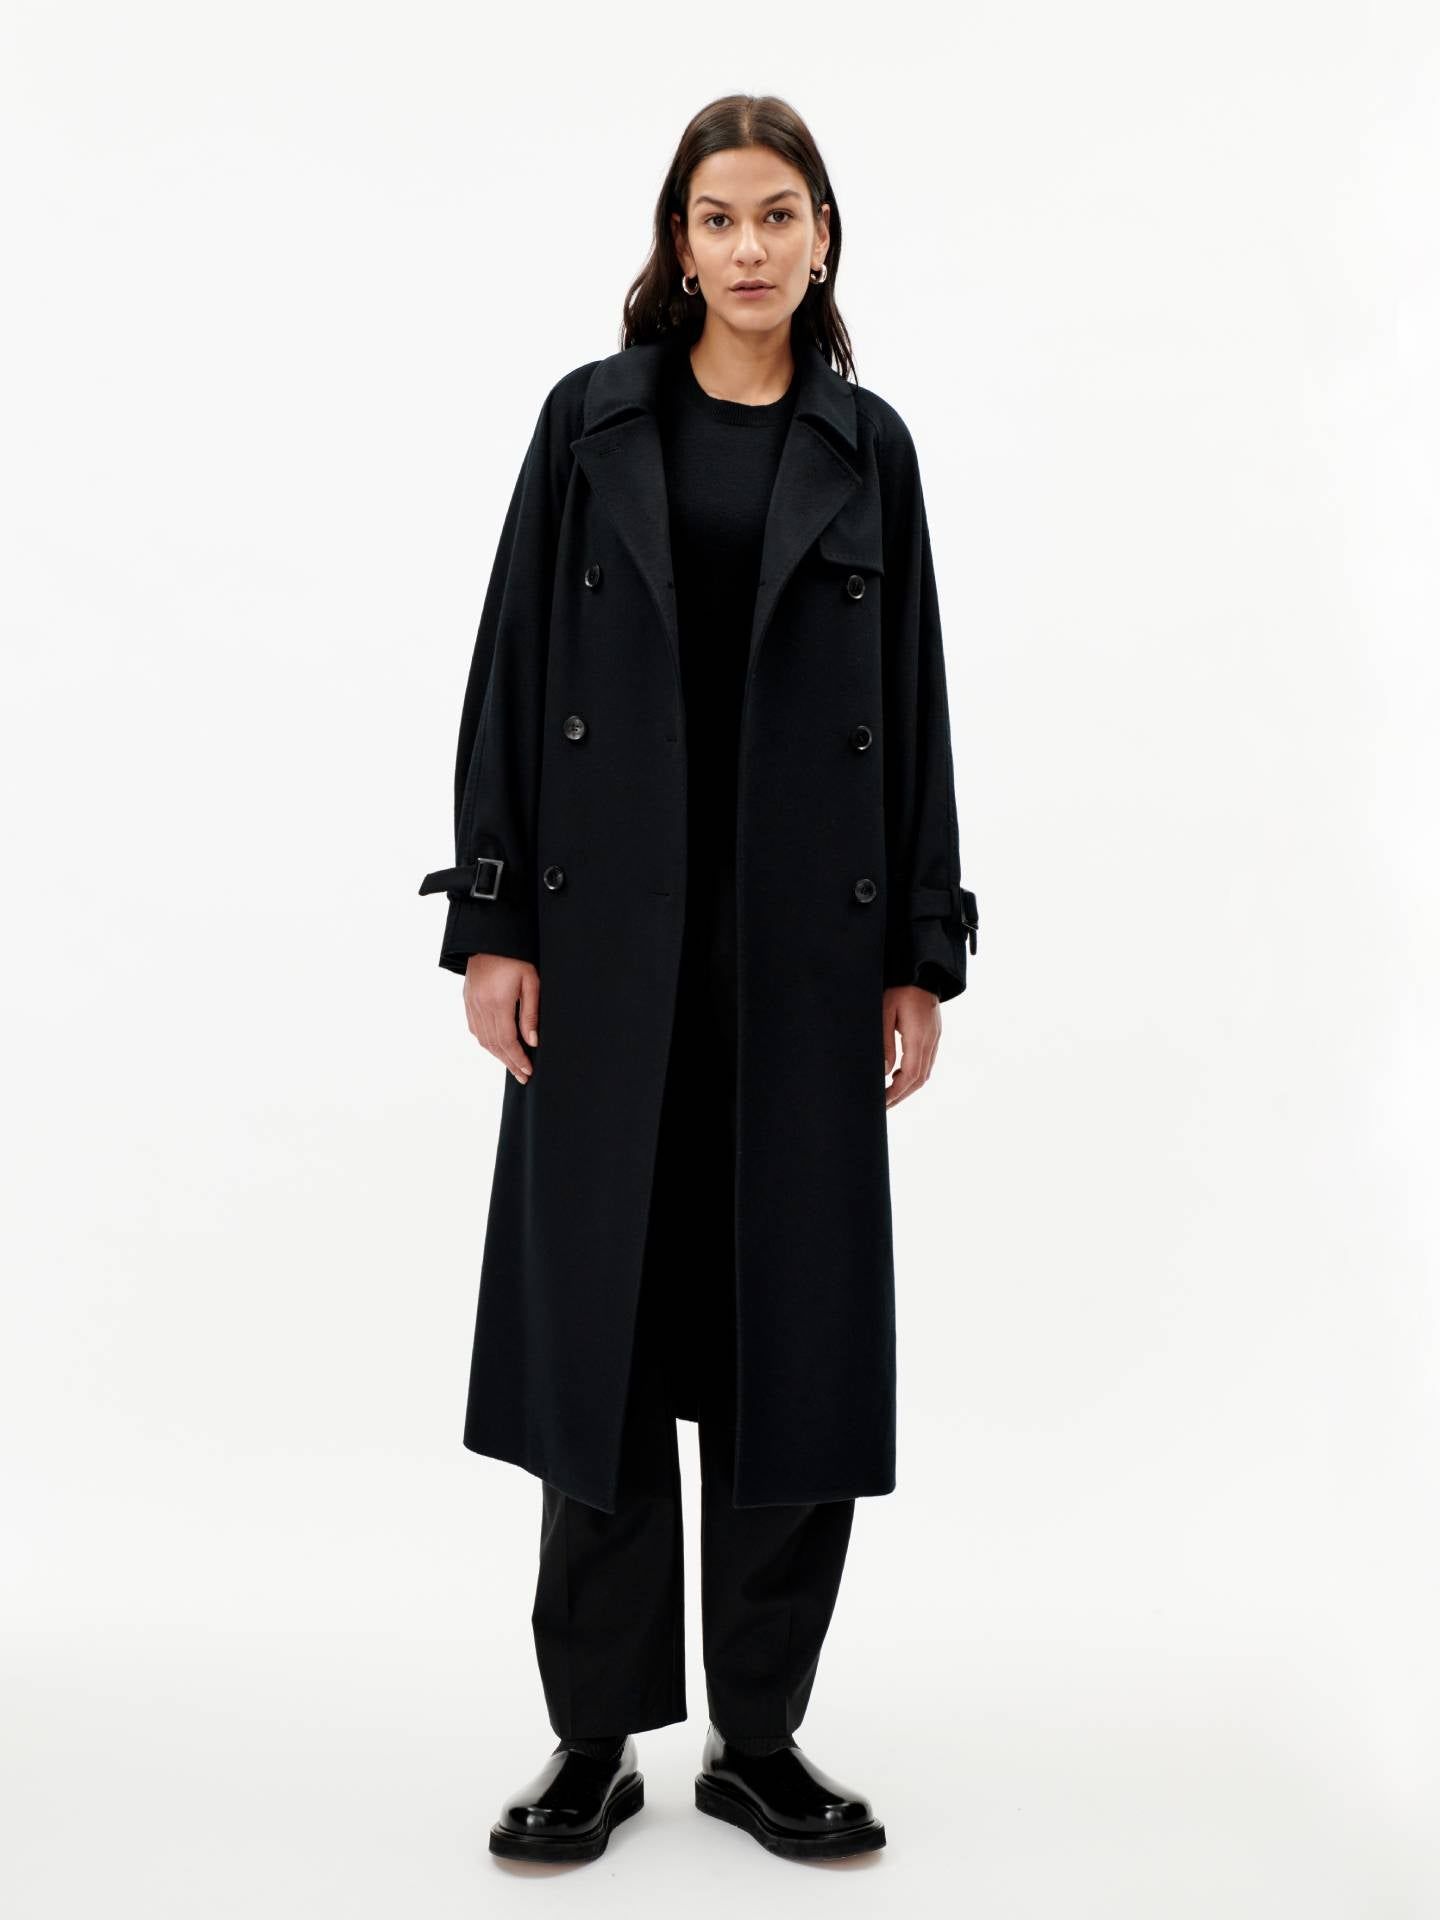 Women's CashmereDouble Breasted Cashmere Trench Coat Black - Gobi Cashmere